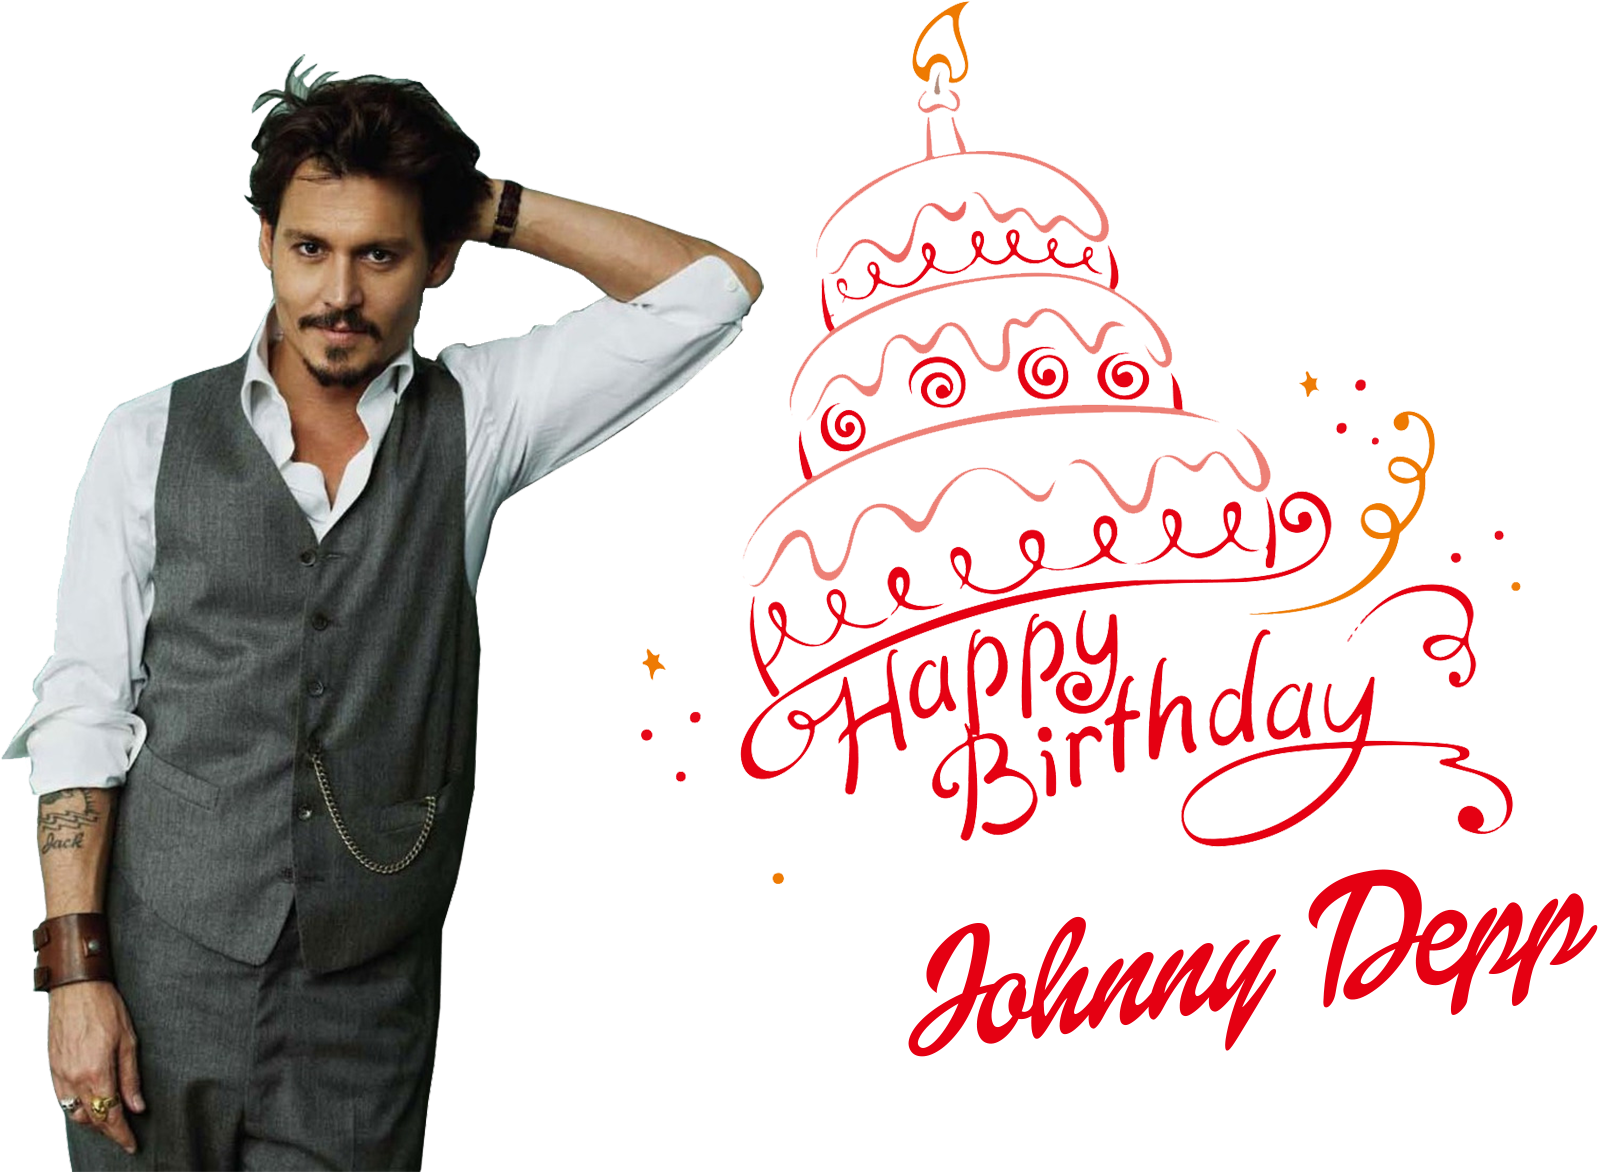 Johnny Depp Png File - Happy Birthday Johnson Cake (1920x1200), Png Download